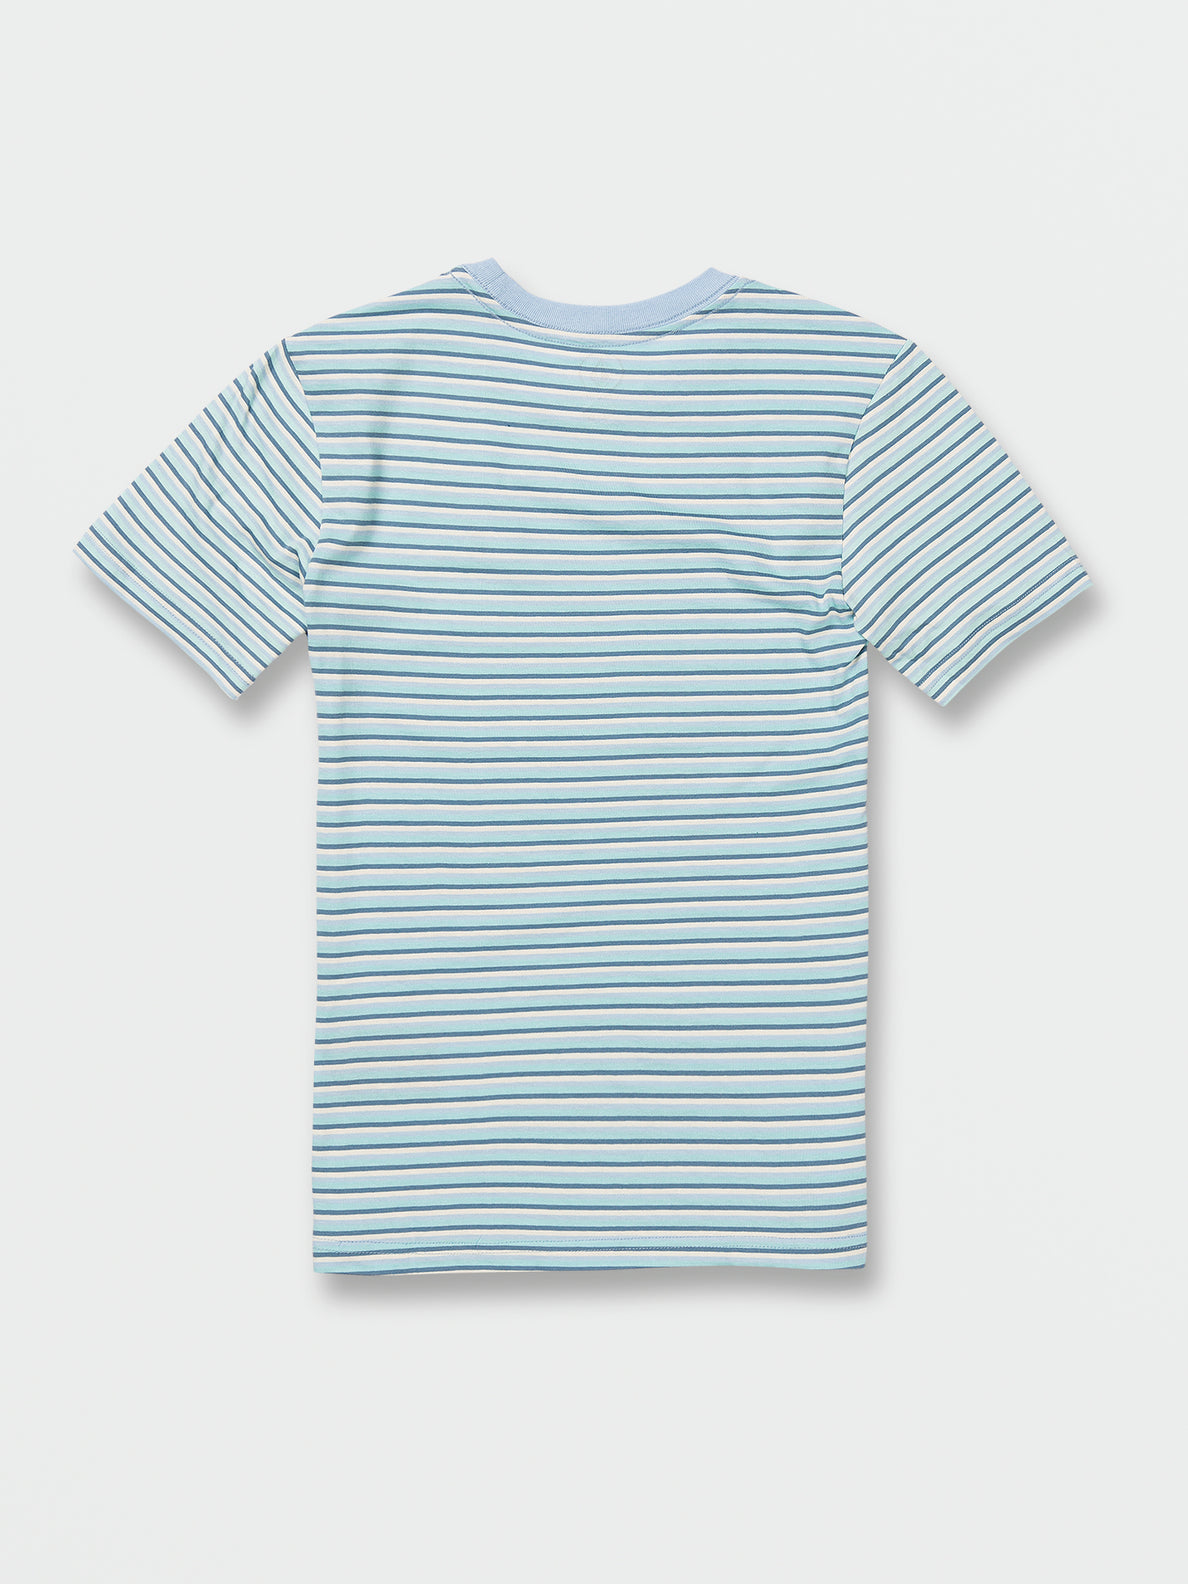 Big Boys Parables Stripes Crew Tee - Washed Blue